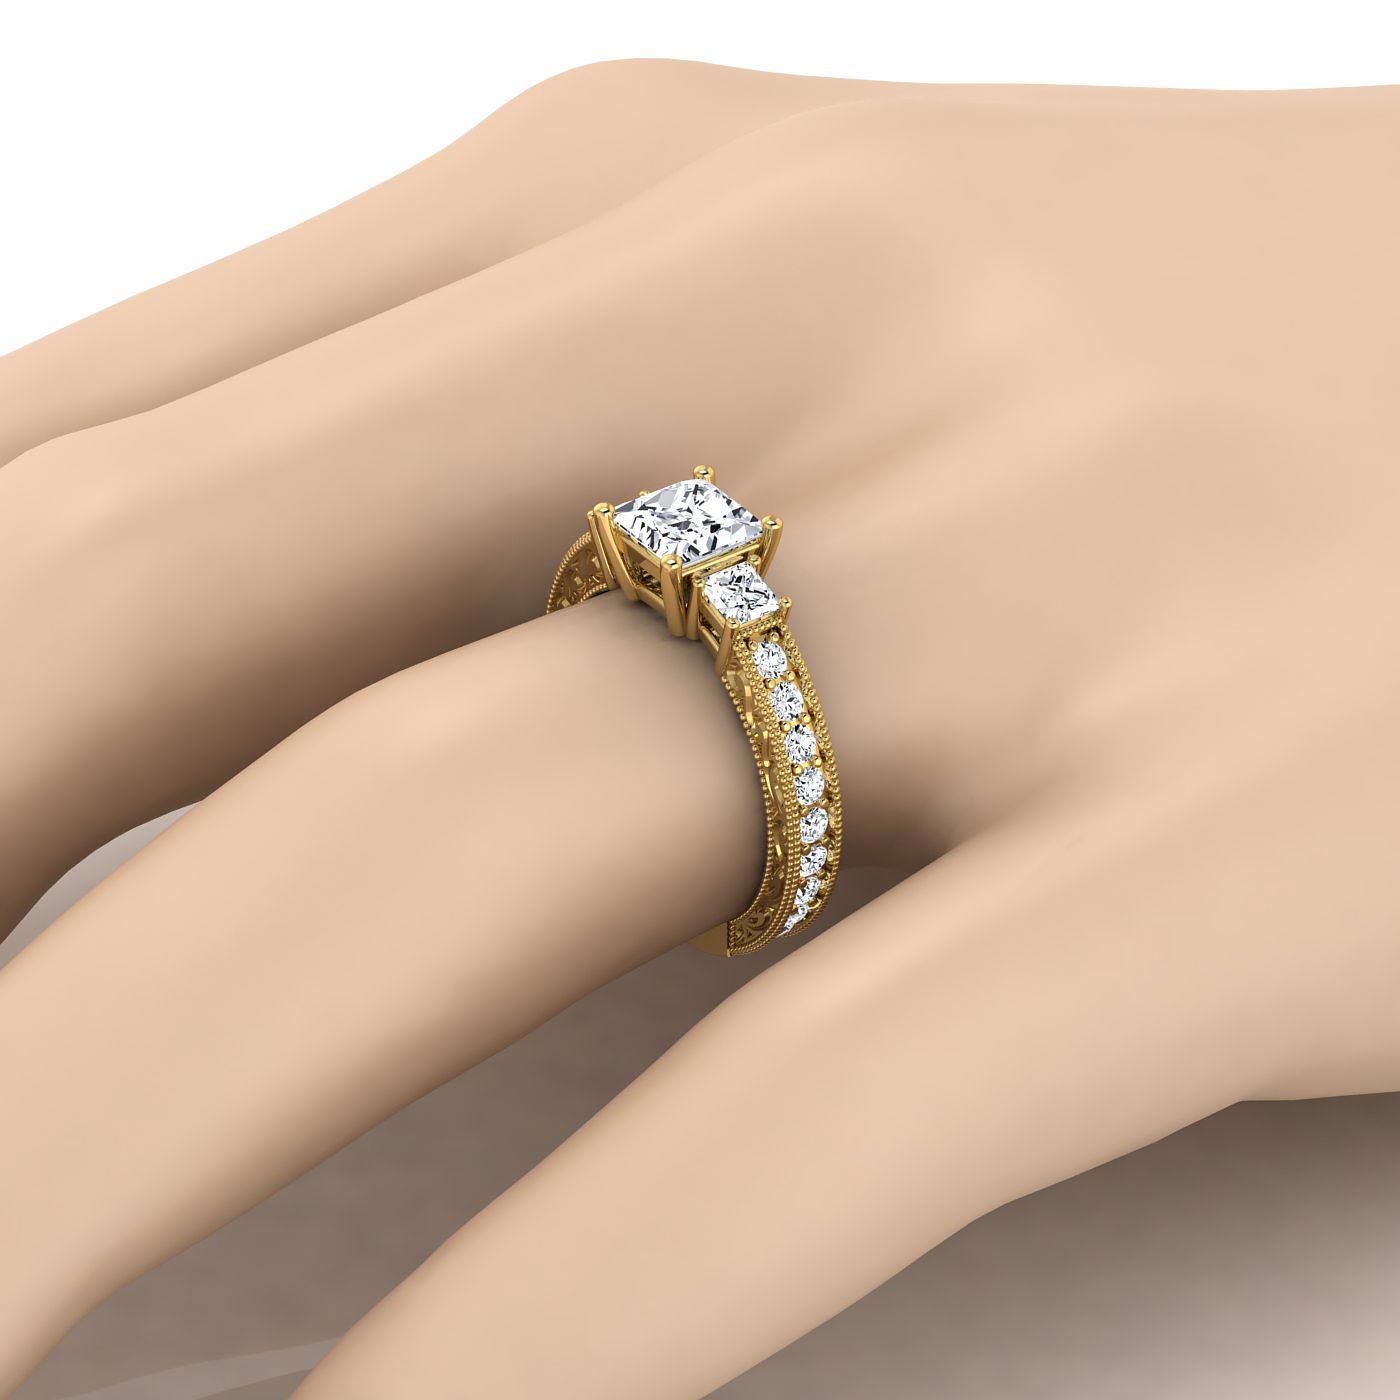 14K Yellow Gold Princess Cut Diamond Hand Engraved Three Stone Vintage Channel Engagement Ring -3/4ctw